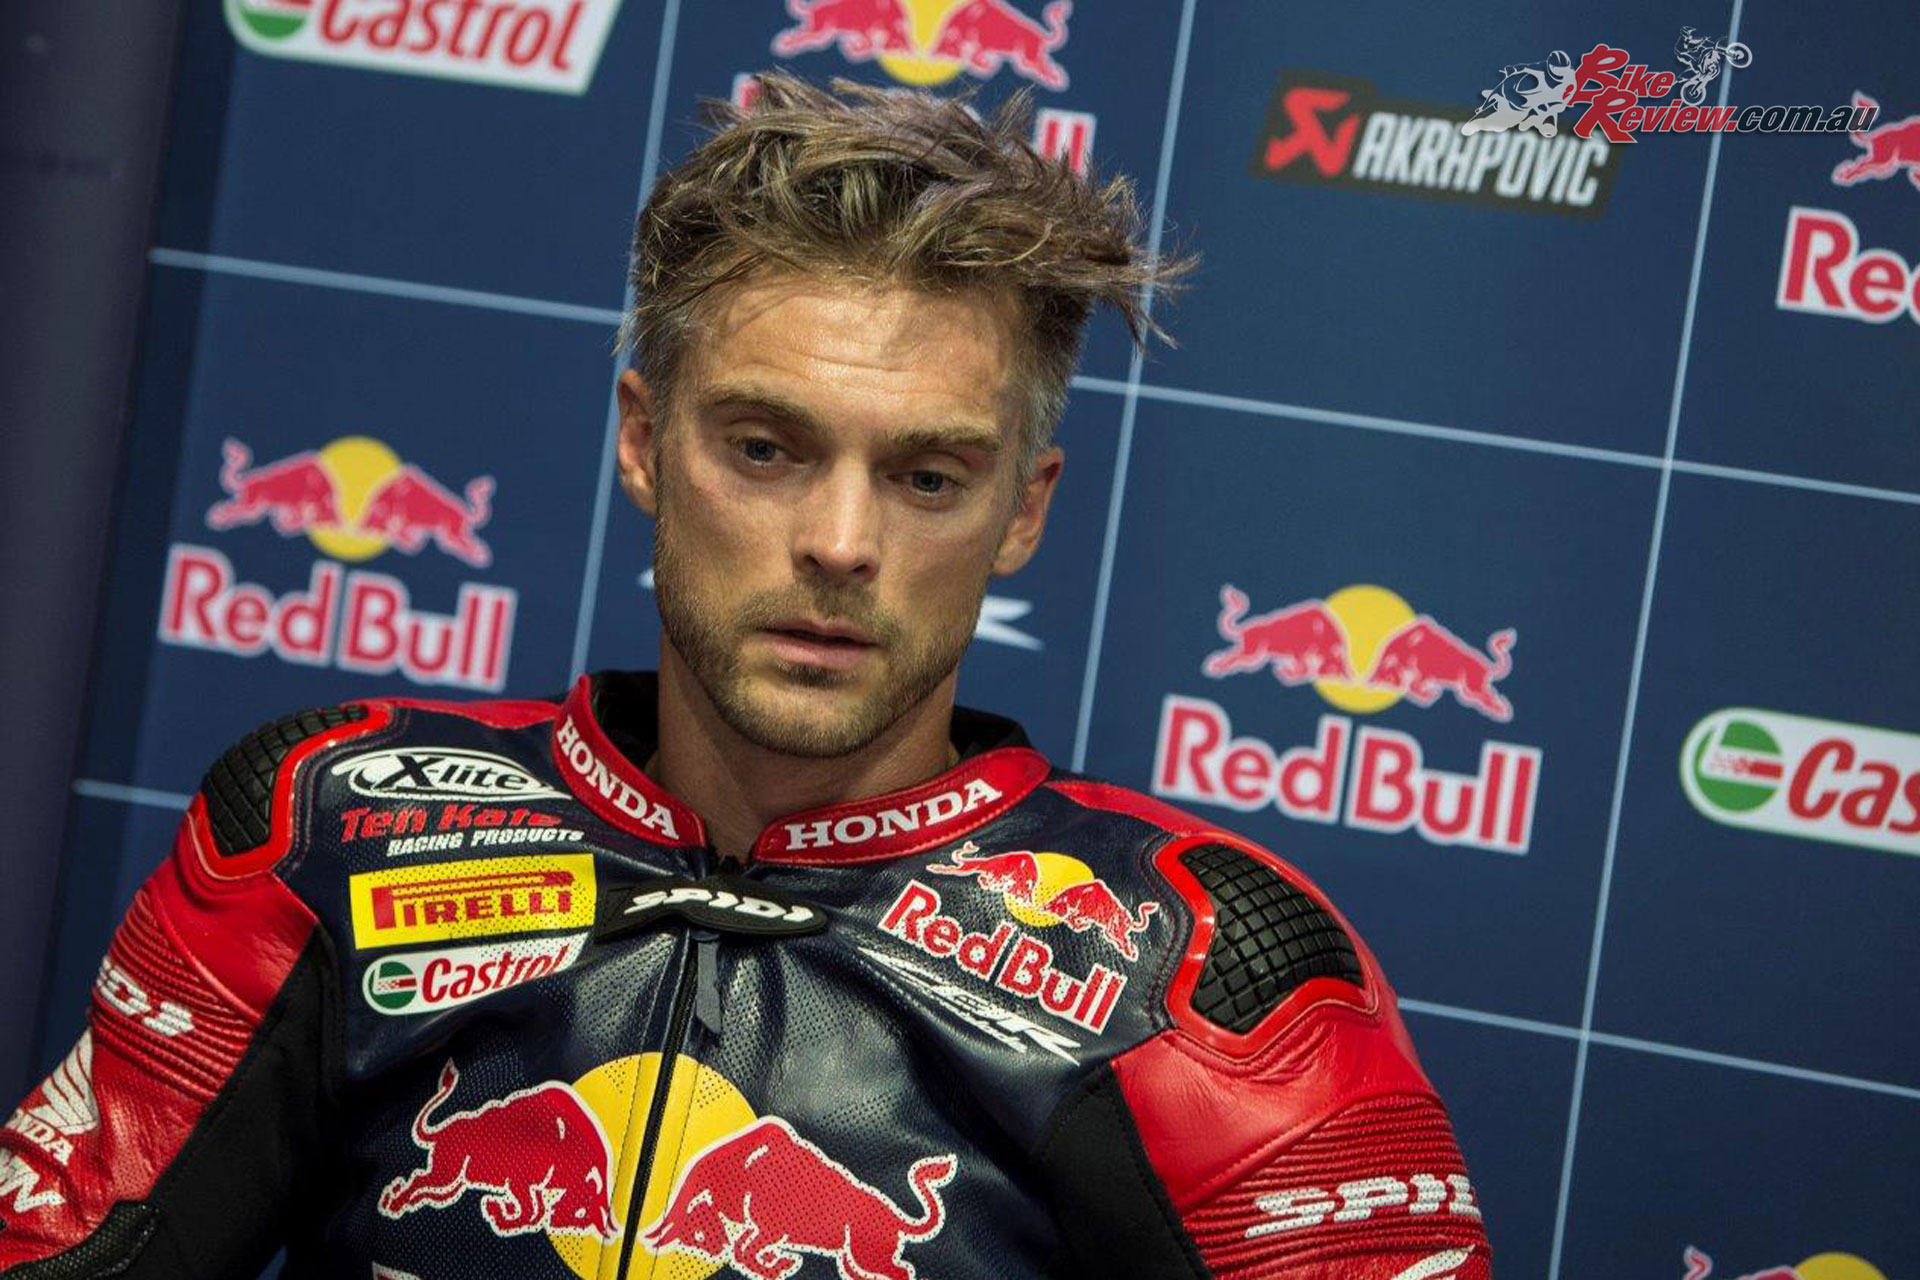 Leon Camier - Image by Geebee